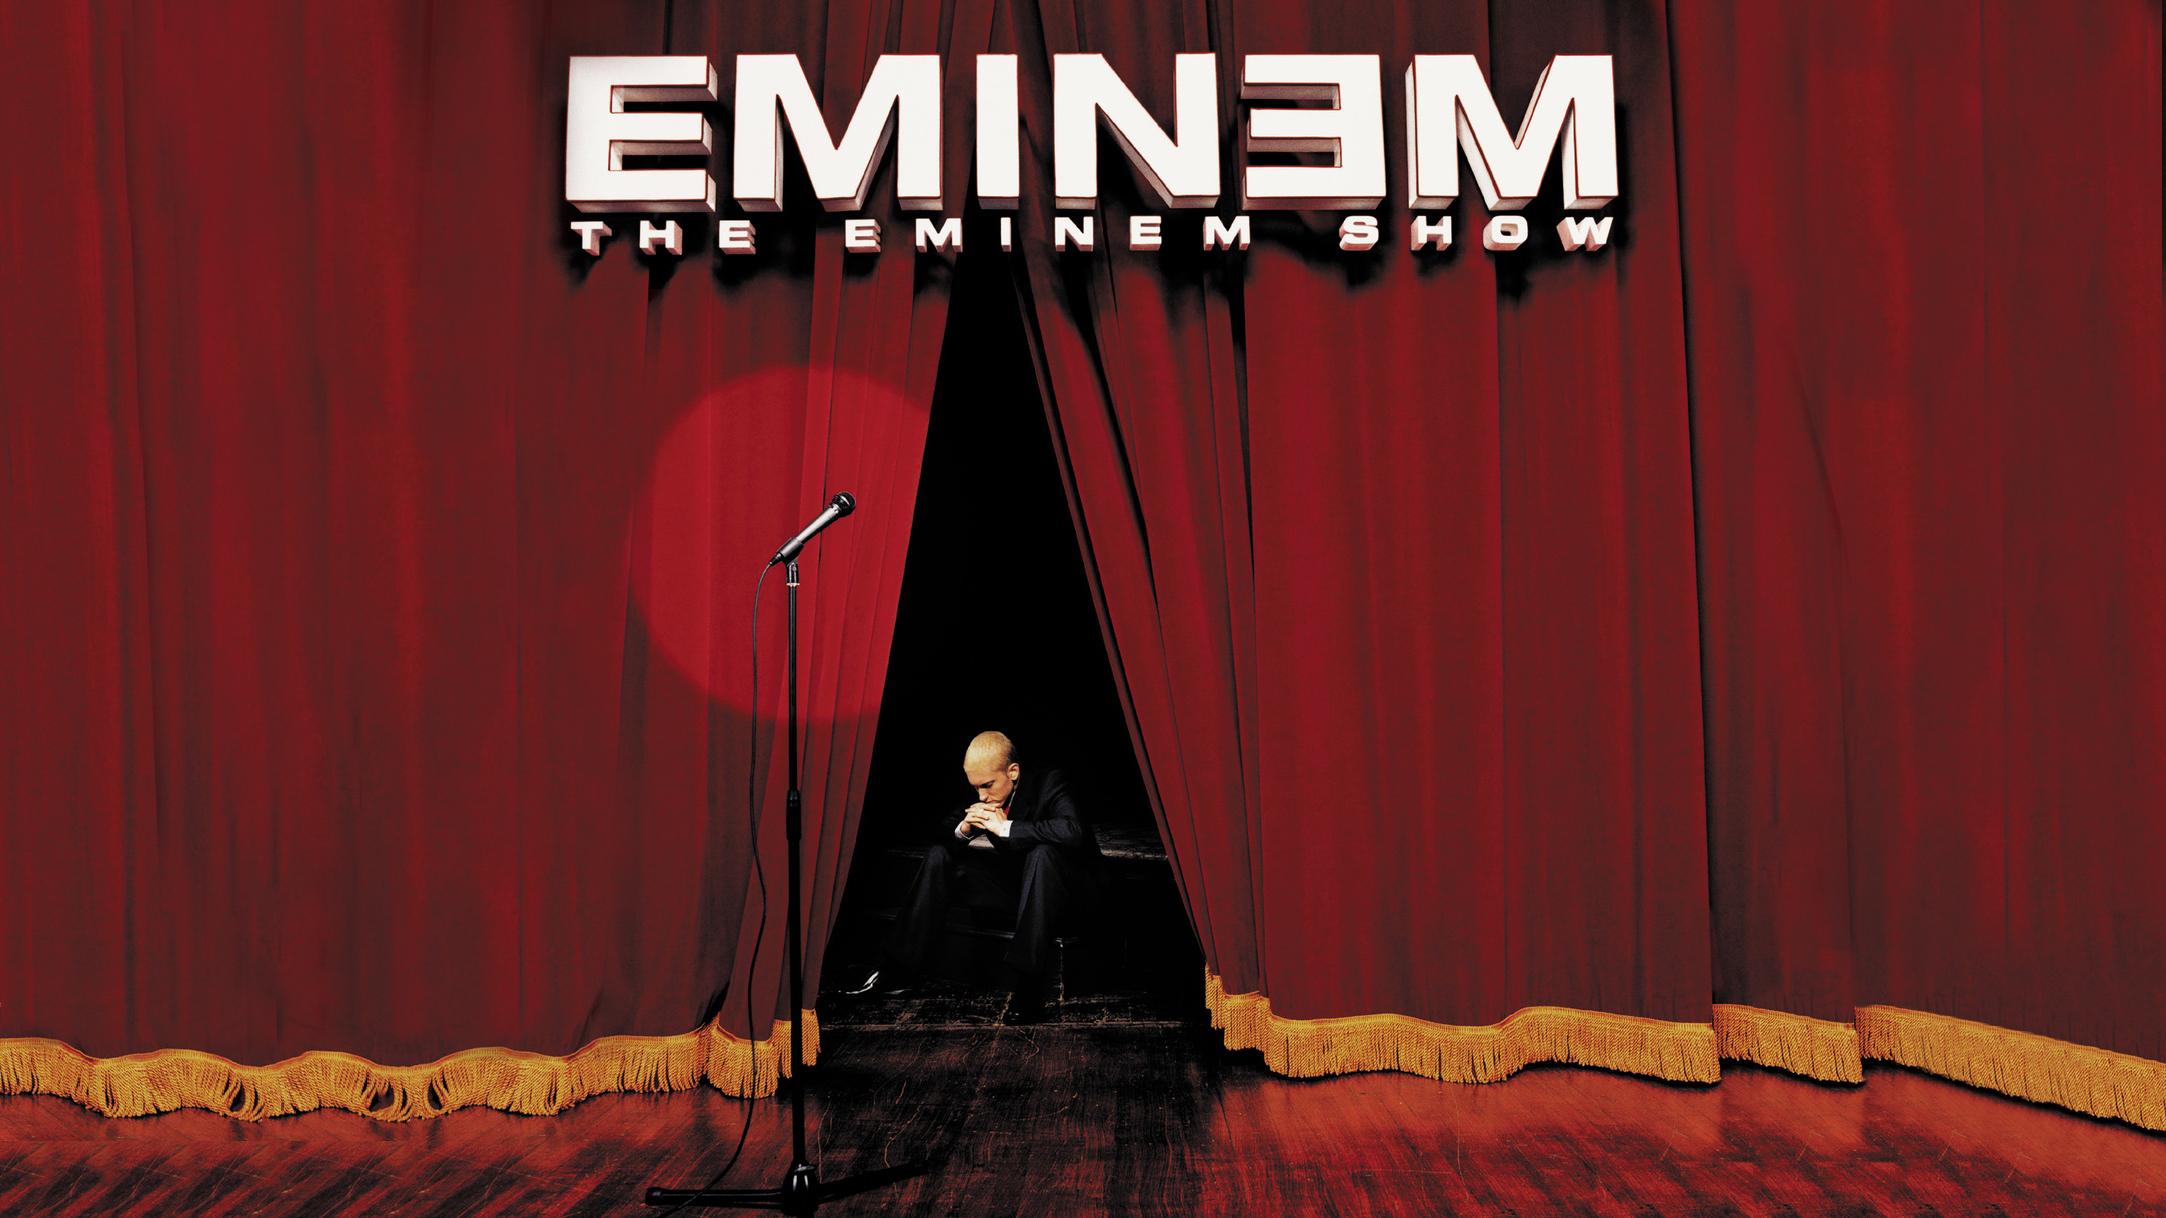 eminem wallpaper,stage,theater curtain,red,curtain,talent show